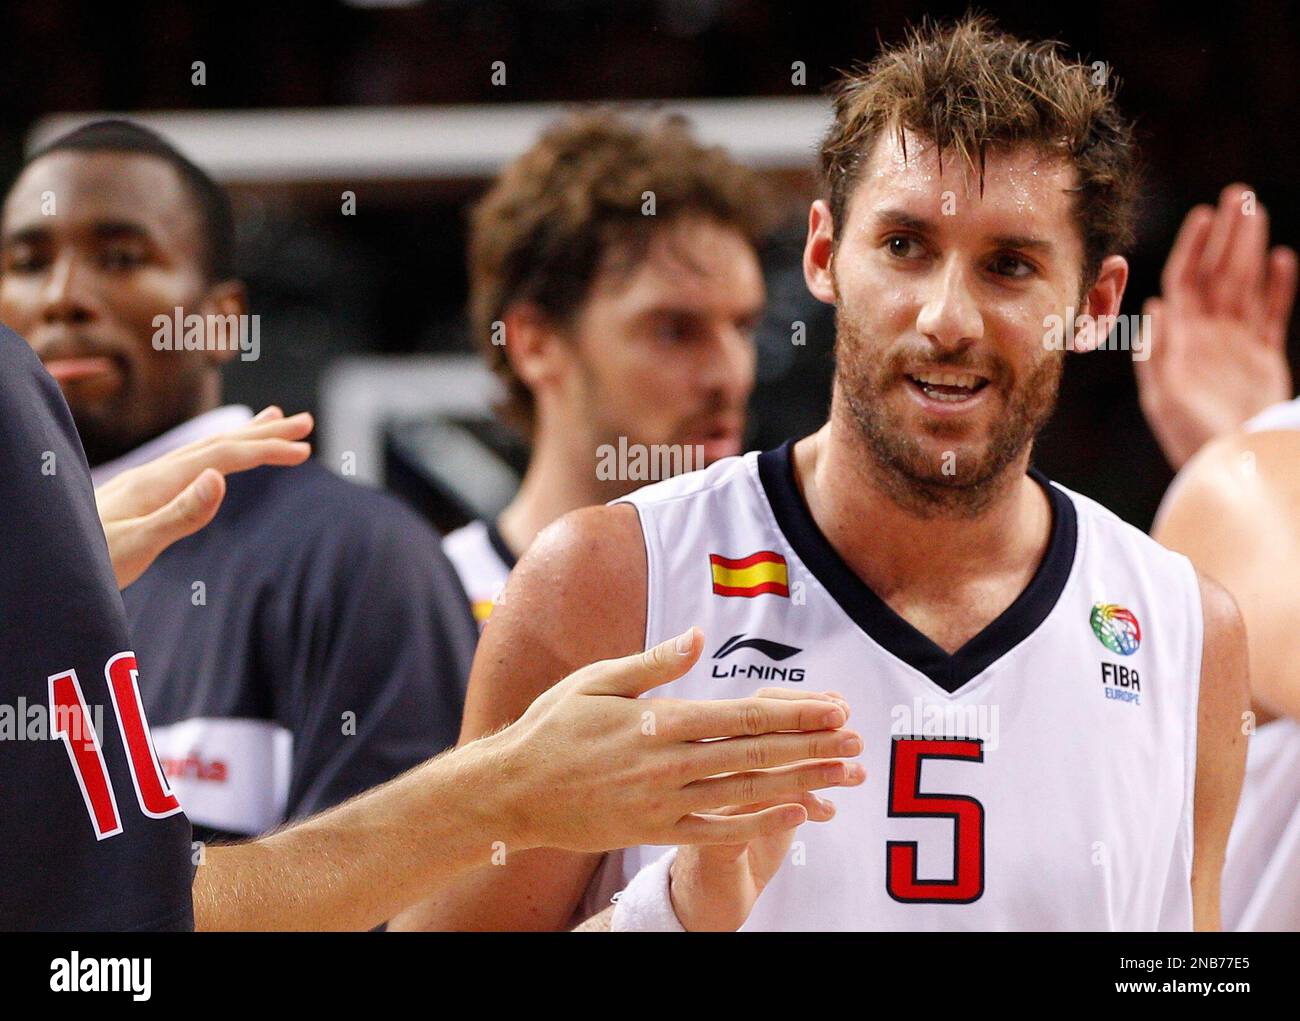 Spain's guard Rudy Fernandez reacts after making a three-point shot against  Lithuania during the first quarter of their men's semifinal basketball game  at the Beijing 2008 Olympics in Beijing, Friday, Aug. 22